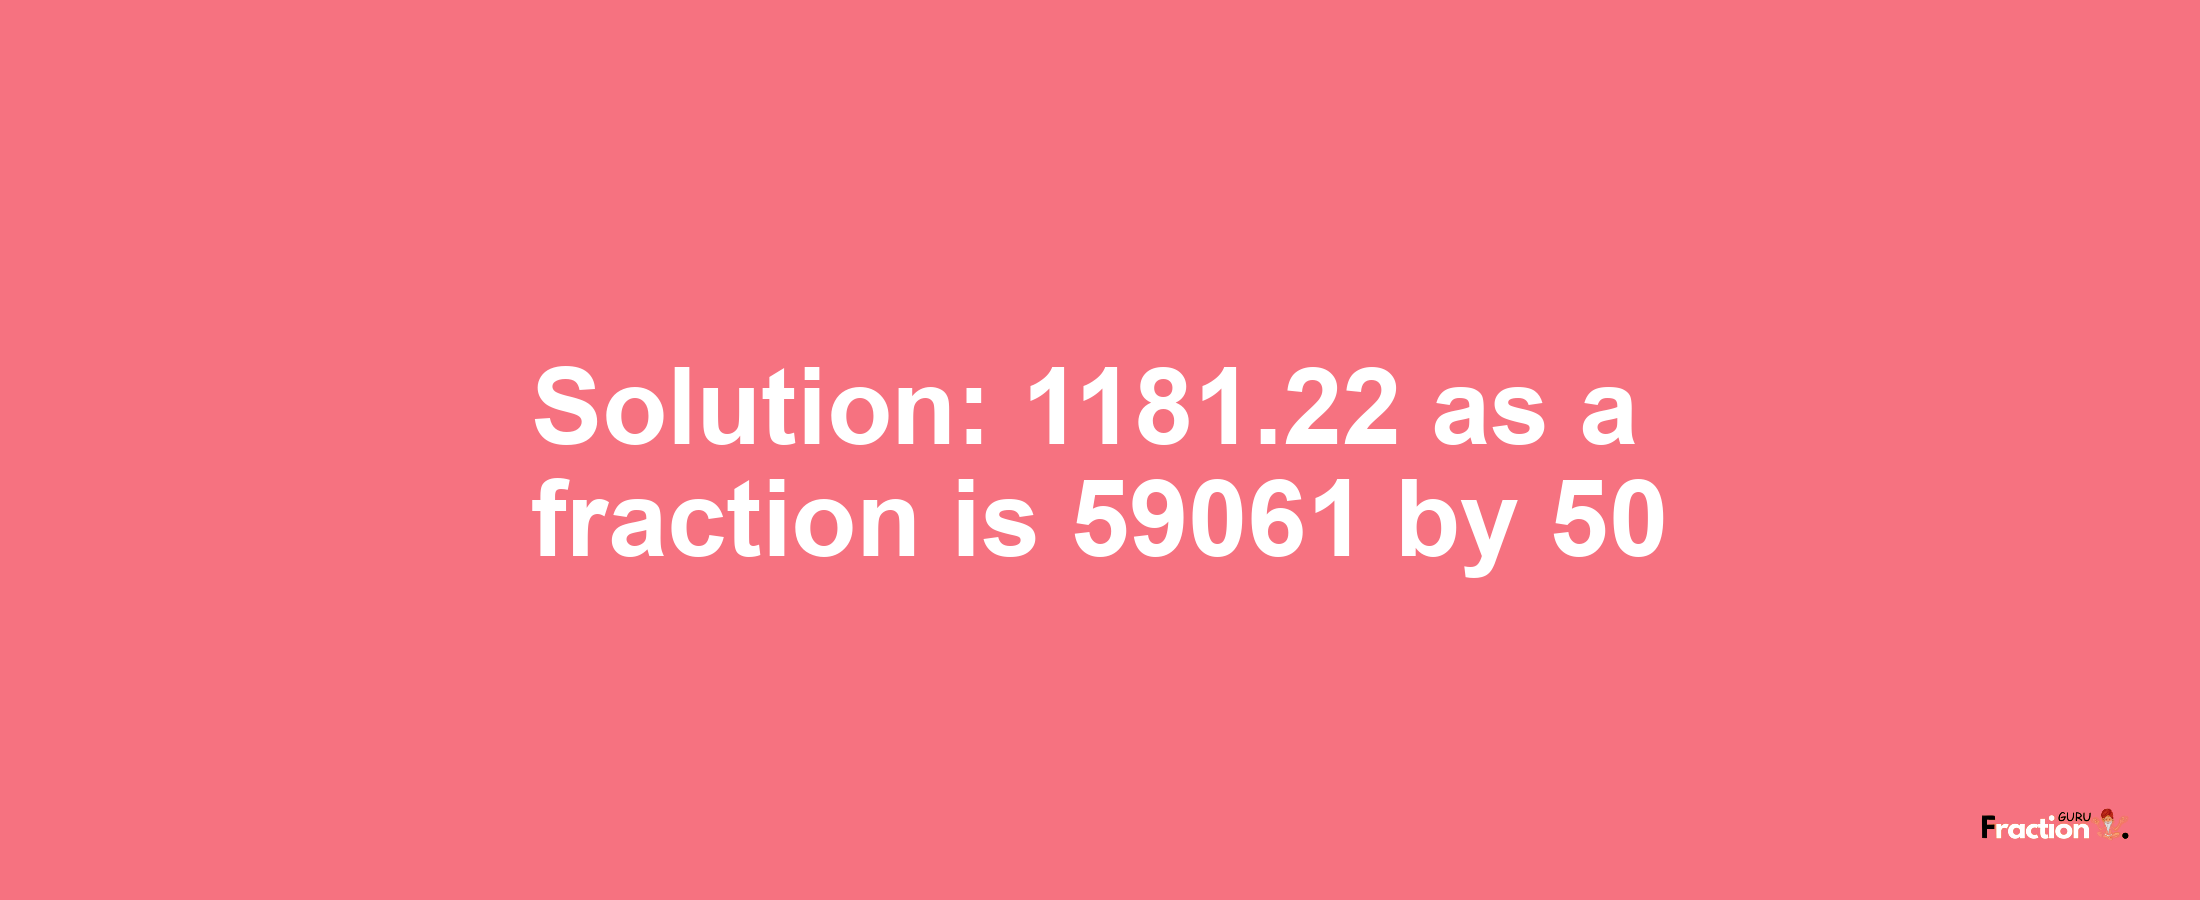 Solution:1181.22 as a fraction is 59061/50